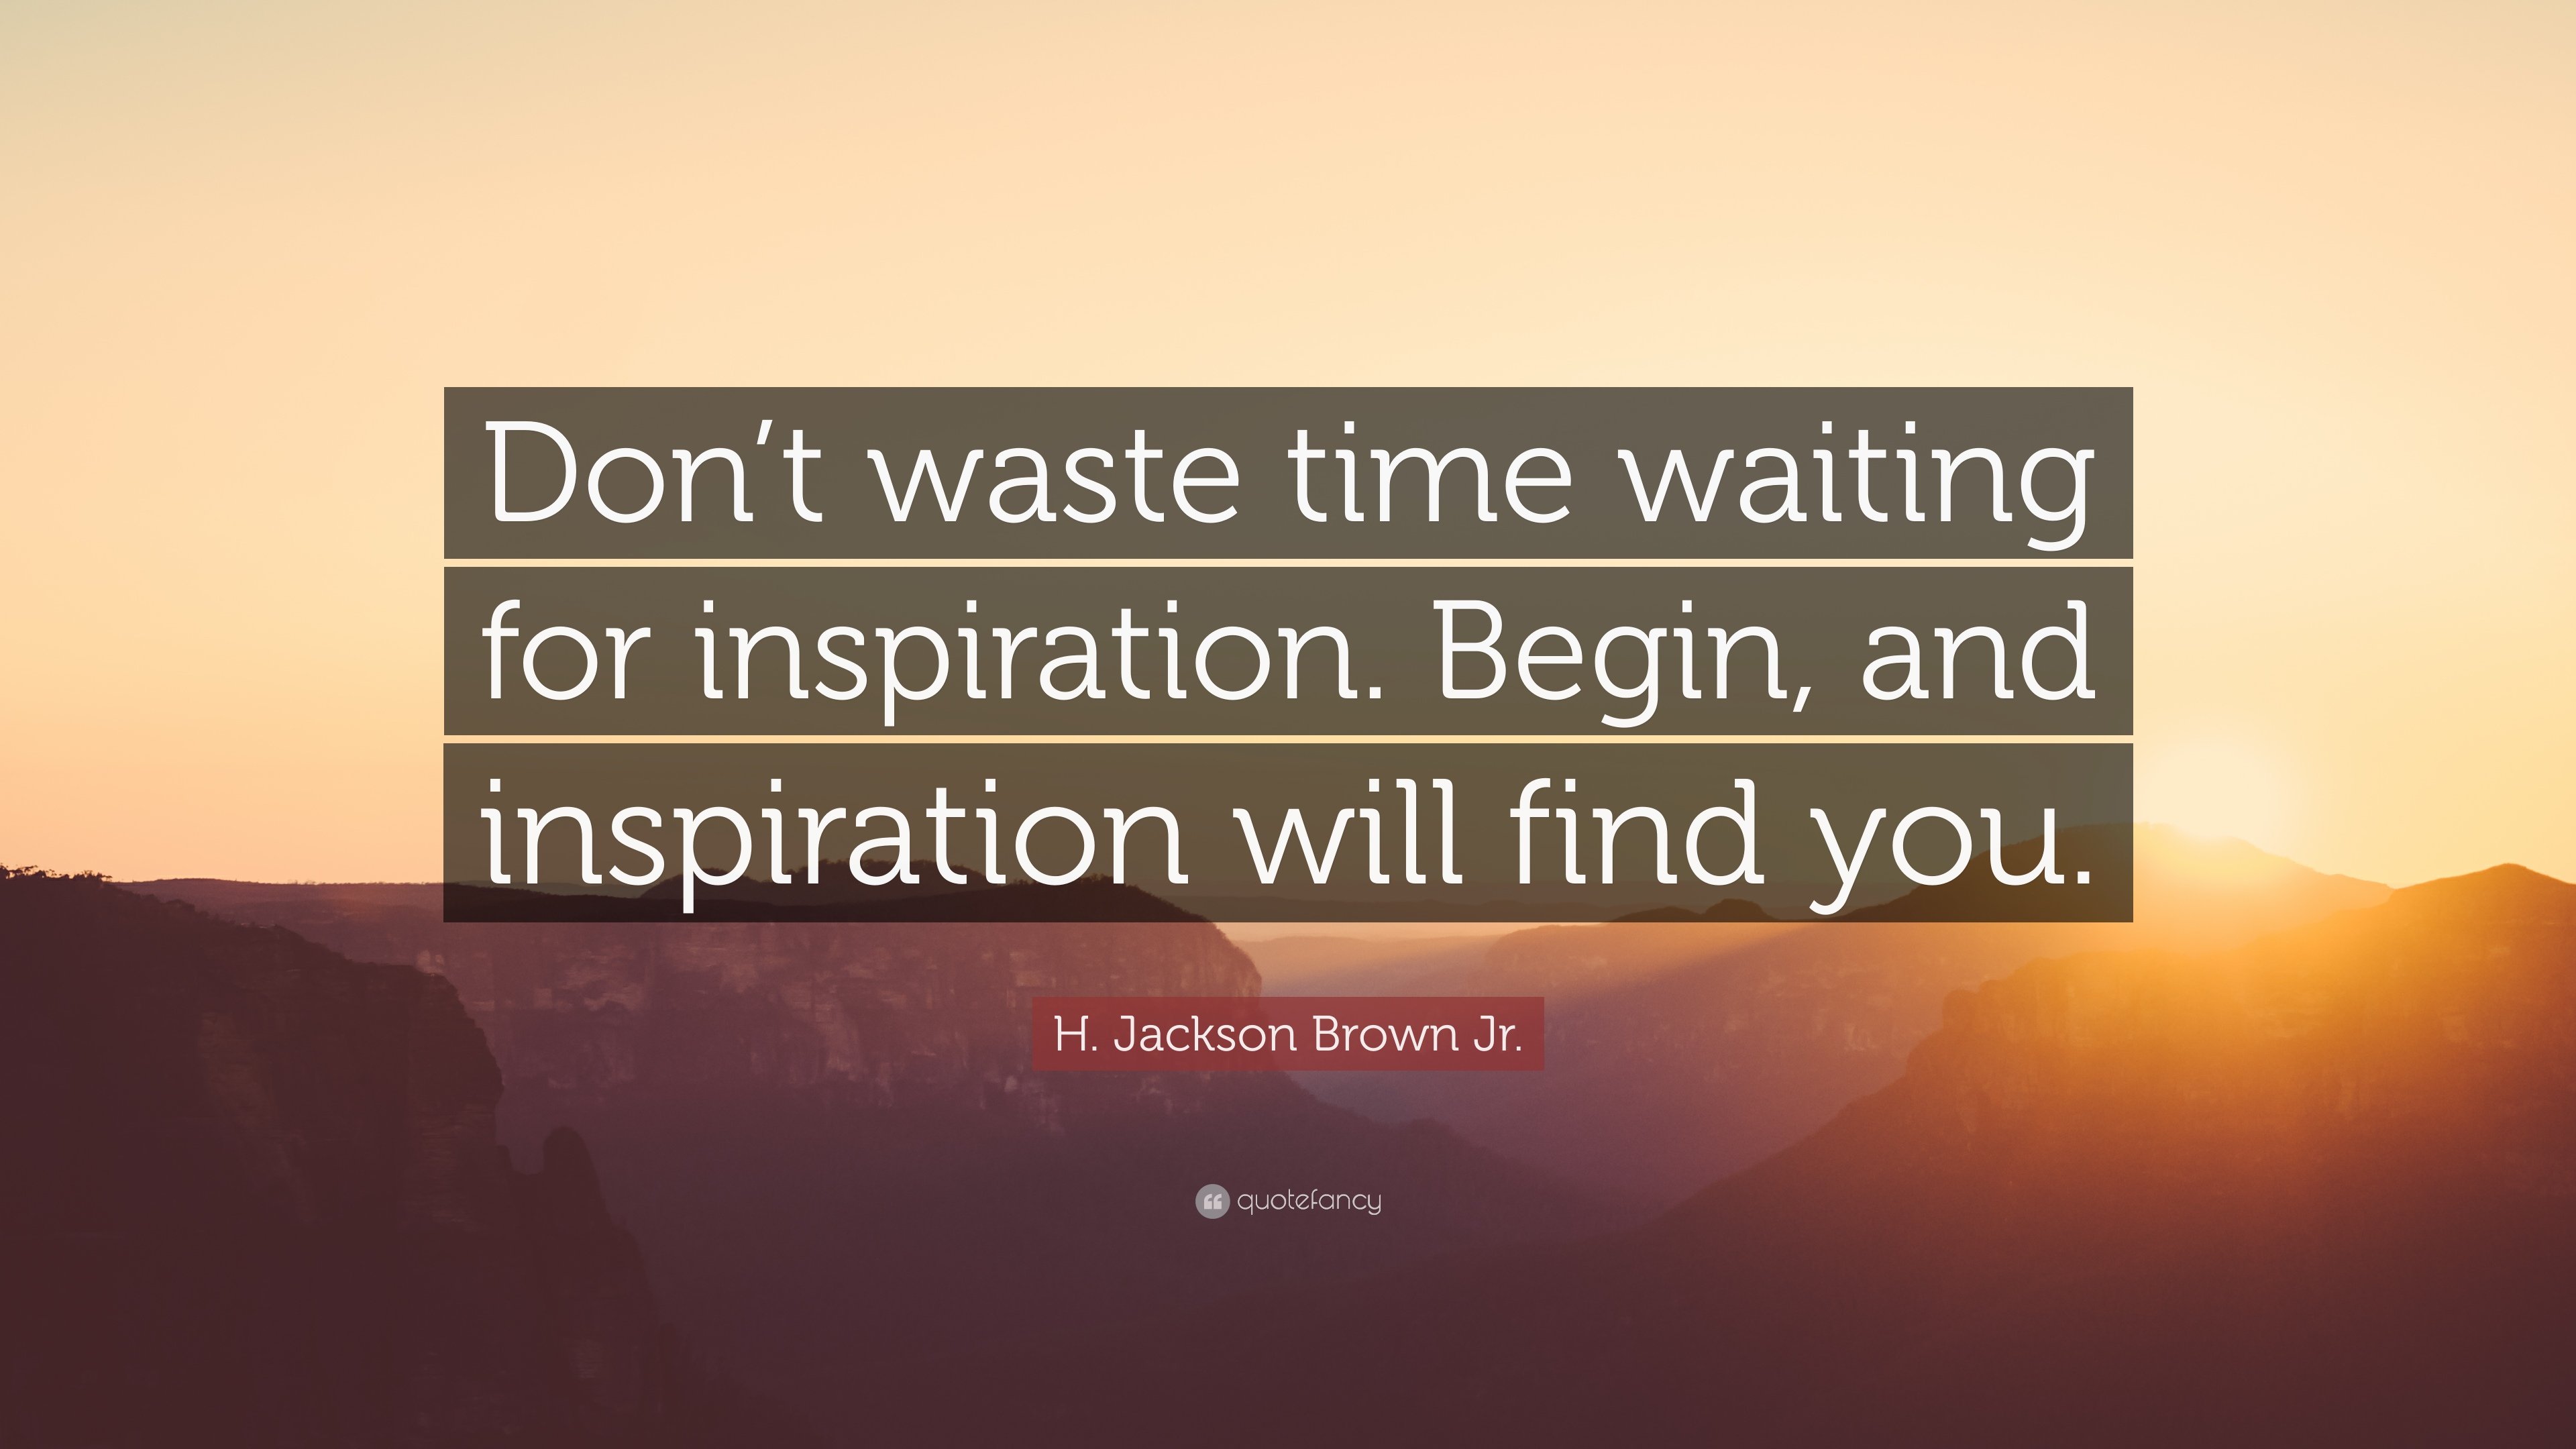 H. Jackson Brown Jr. Quote: “Don't waste time waiting for inspiration. Begin, and inspiration will